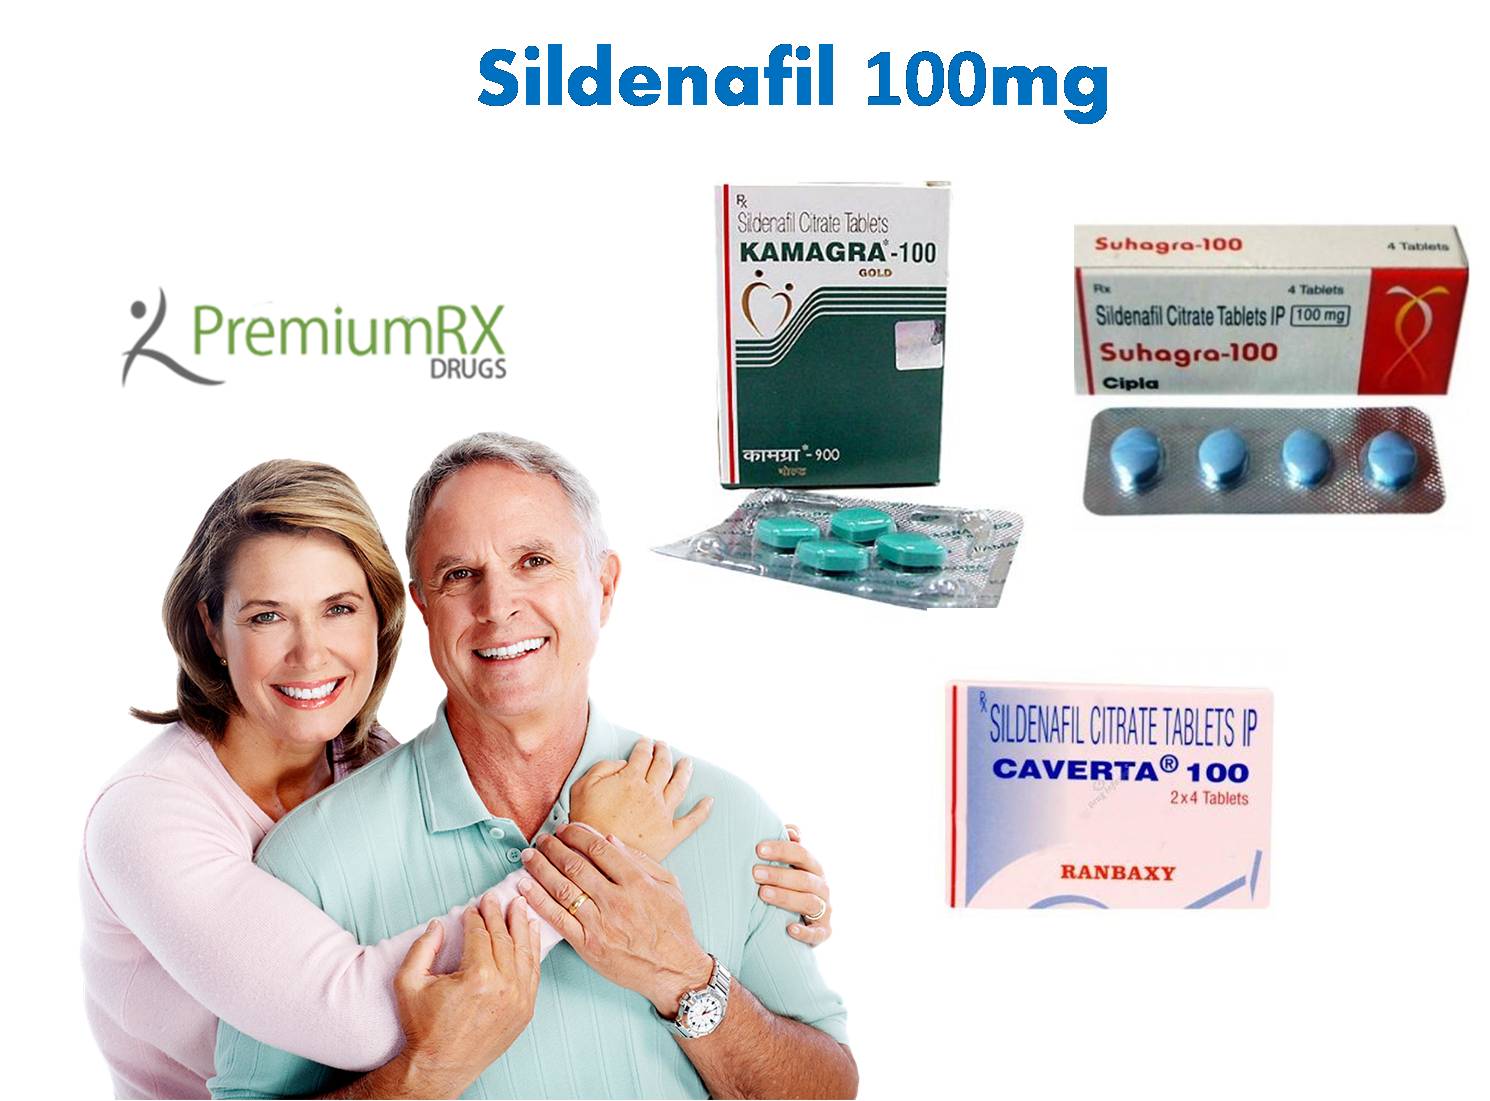 Sildenafil 100mg – How to Take the Dosage for ED